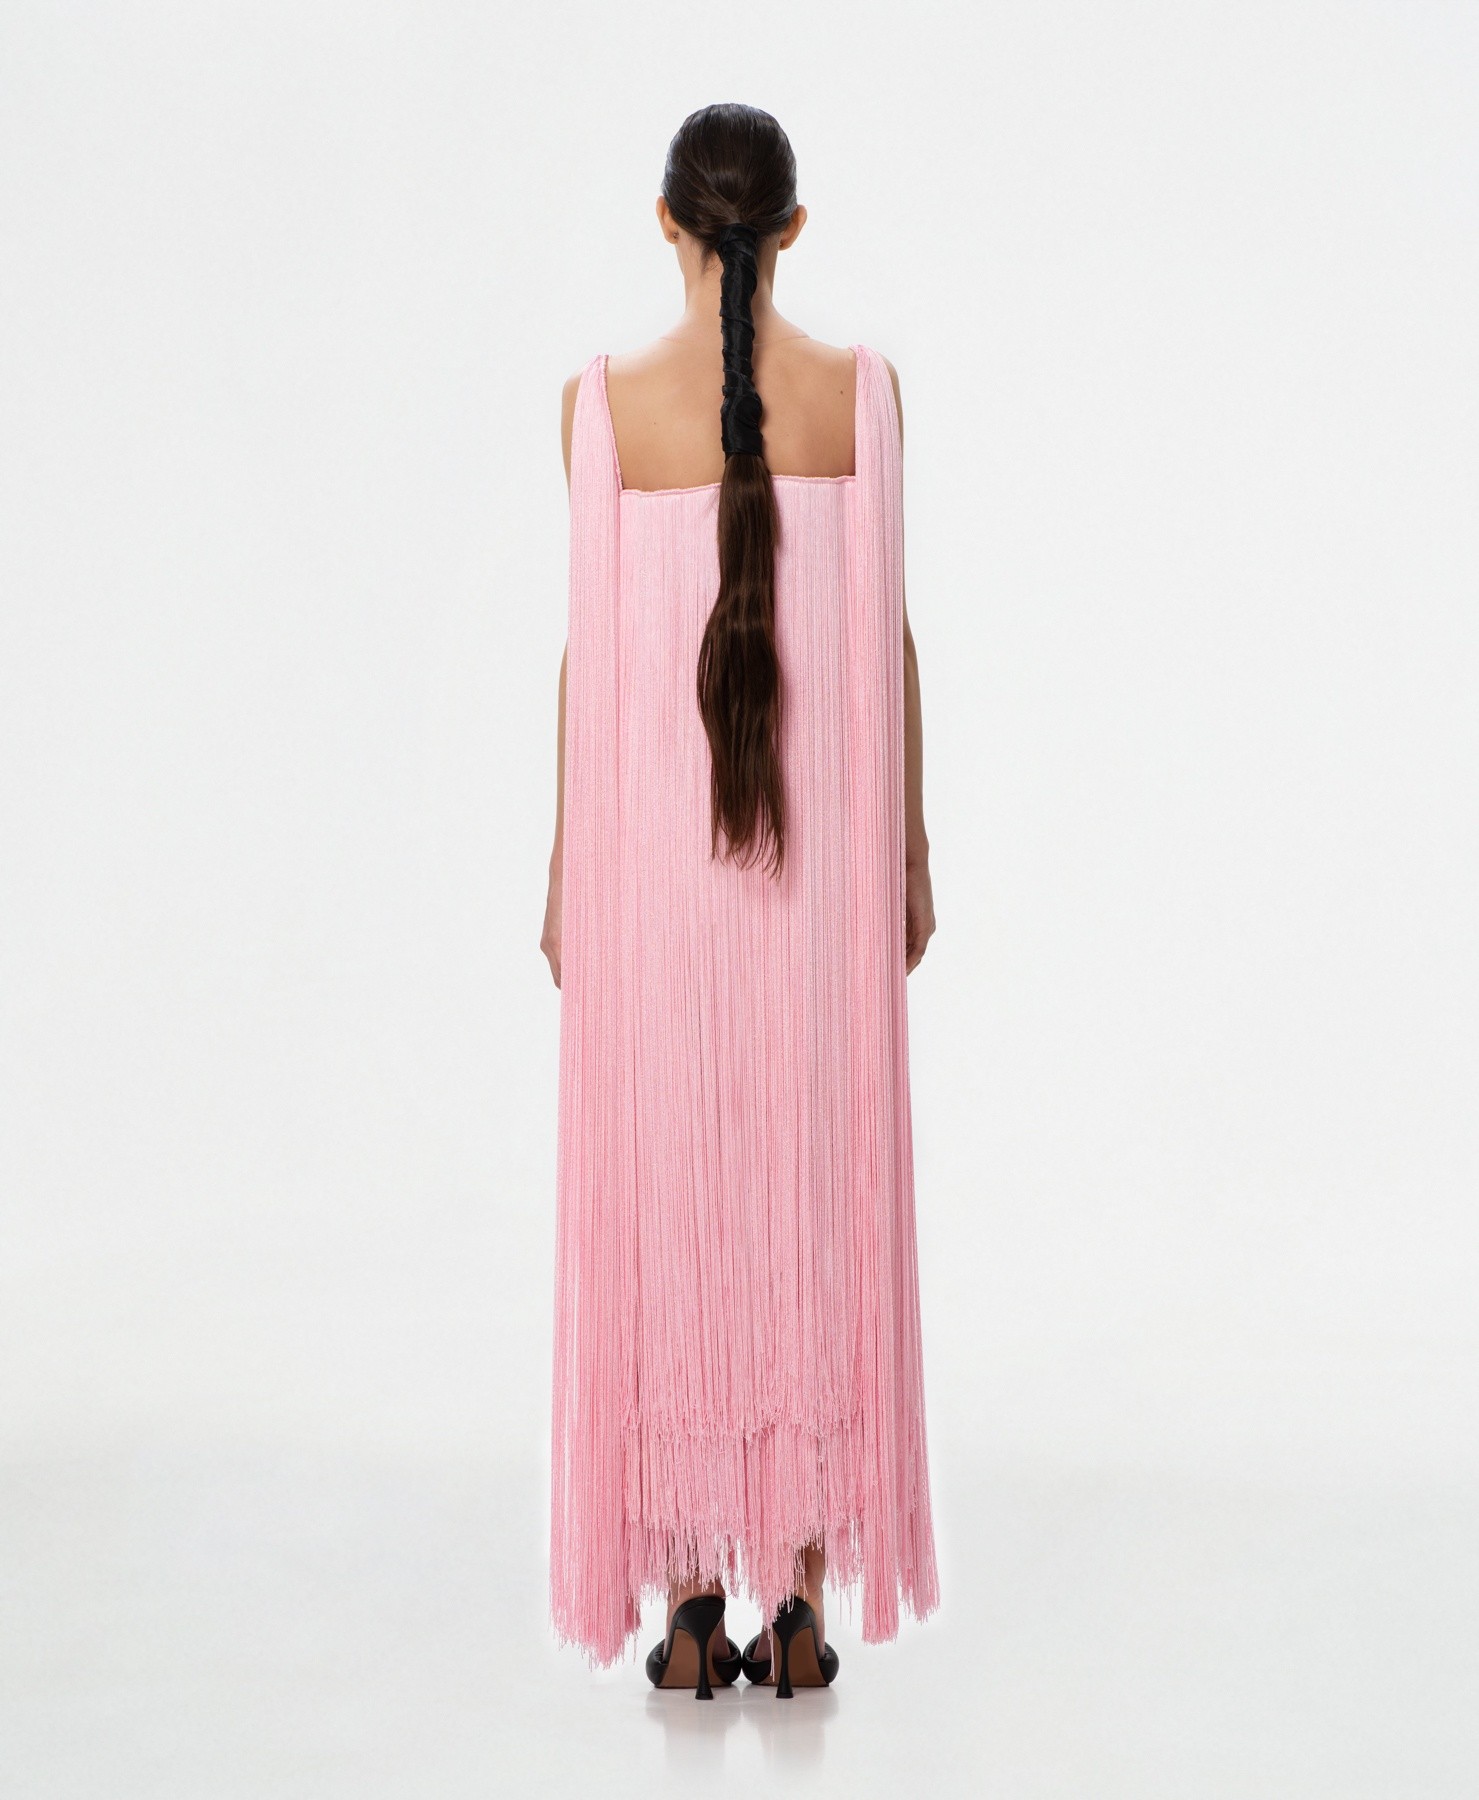 Fringed Dress LIS - by CLARO Couture